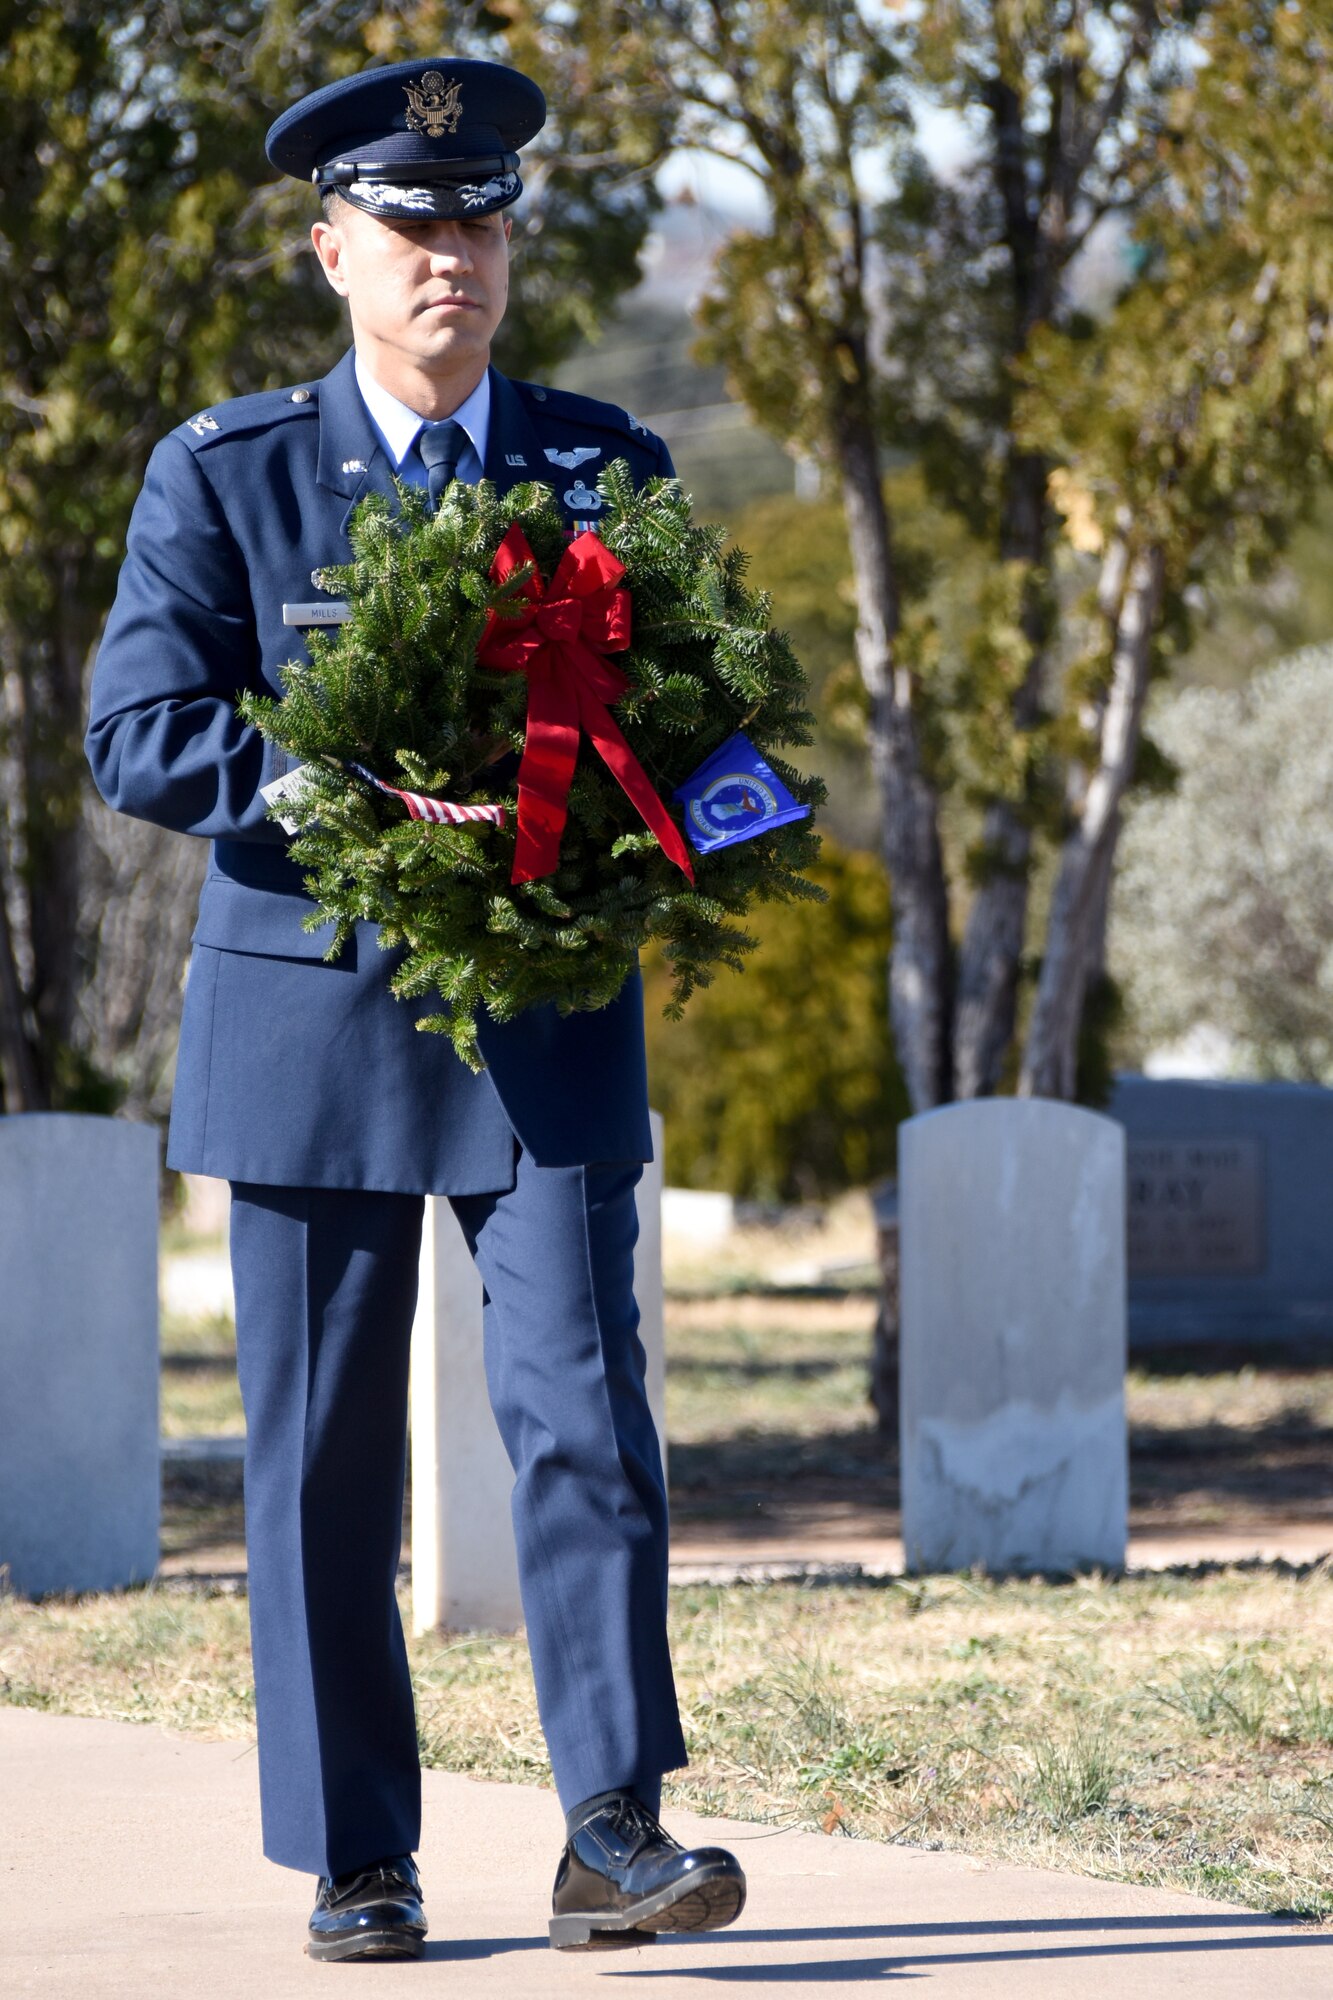 U.S. Air Force Col. Ricky Mills, 17th Training Wing commander, shows honor and respect for veterans and active duty members serving in the Air Force with a wreath symbolizing that branch of the armed forces during the Wreaths Across America ceremony at Belvedere Memorial Cemetery, San Angelo, Texas, Dec. 15, 2018. Other leaders from Goodfellow each laid a wreath representing all veterans and duty members from the different branches. (U.S. Air Force photo by Airman 1st Class Seraiah Hines/ Released)